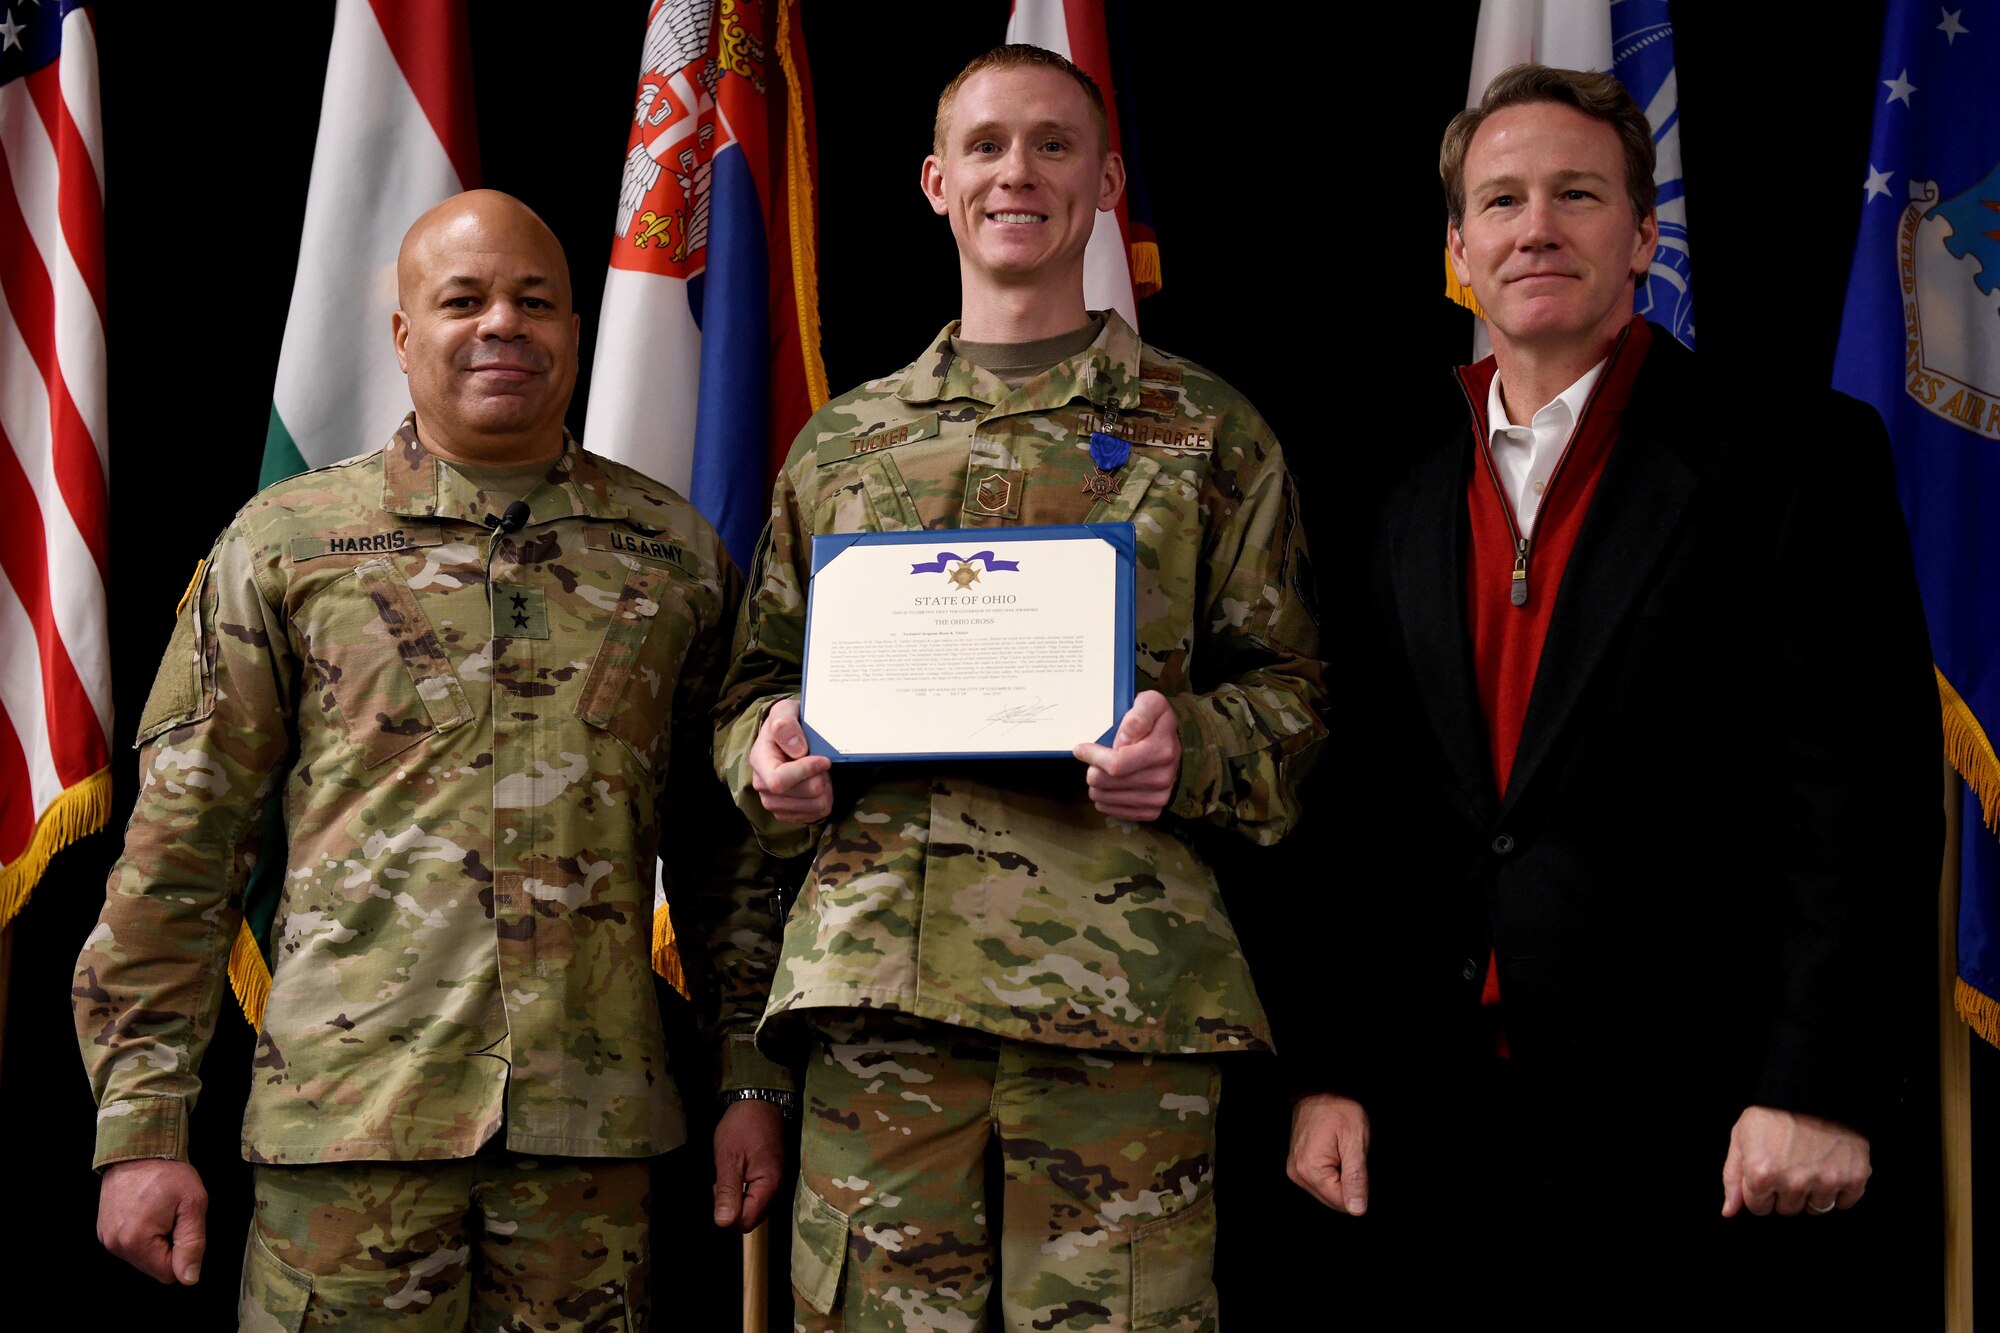 U.S. Army Maj. General John C. Harris, the Ohio Adjutant General, U.S. Air Force Master Sgt. Ryan Tucker, and Ohio’s Lt. Governor Jon Husted pose for a portrait after Husted awarded the Ohio Cross to Tucker during the Ohio National Guard’s Joint Senior Leaders Conference Feb. 14, 2020 in Columbus, Ohio. The Ohio Cross is awarded to any member of the state military forces who distinguishes themselves by gallantry and intrepidity at the risk of their life. (U.S. Air Force photo by Tech. Sgt. Shane Hughes)